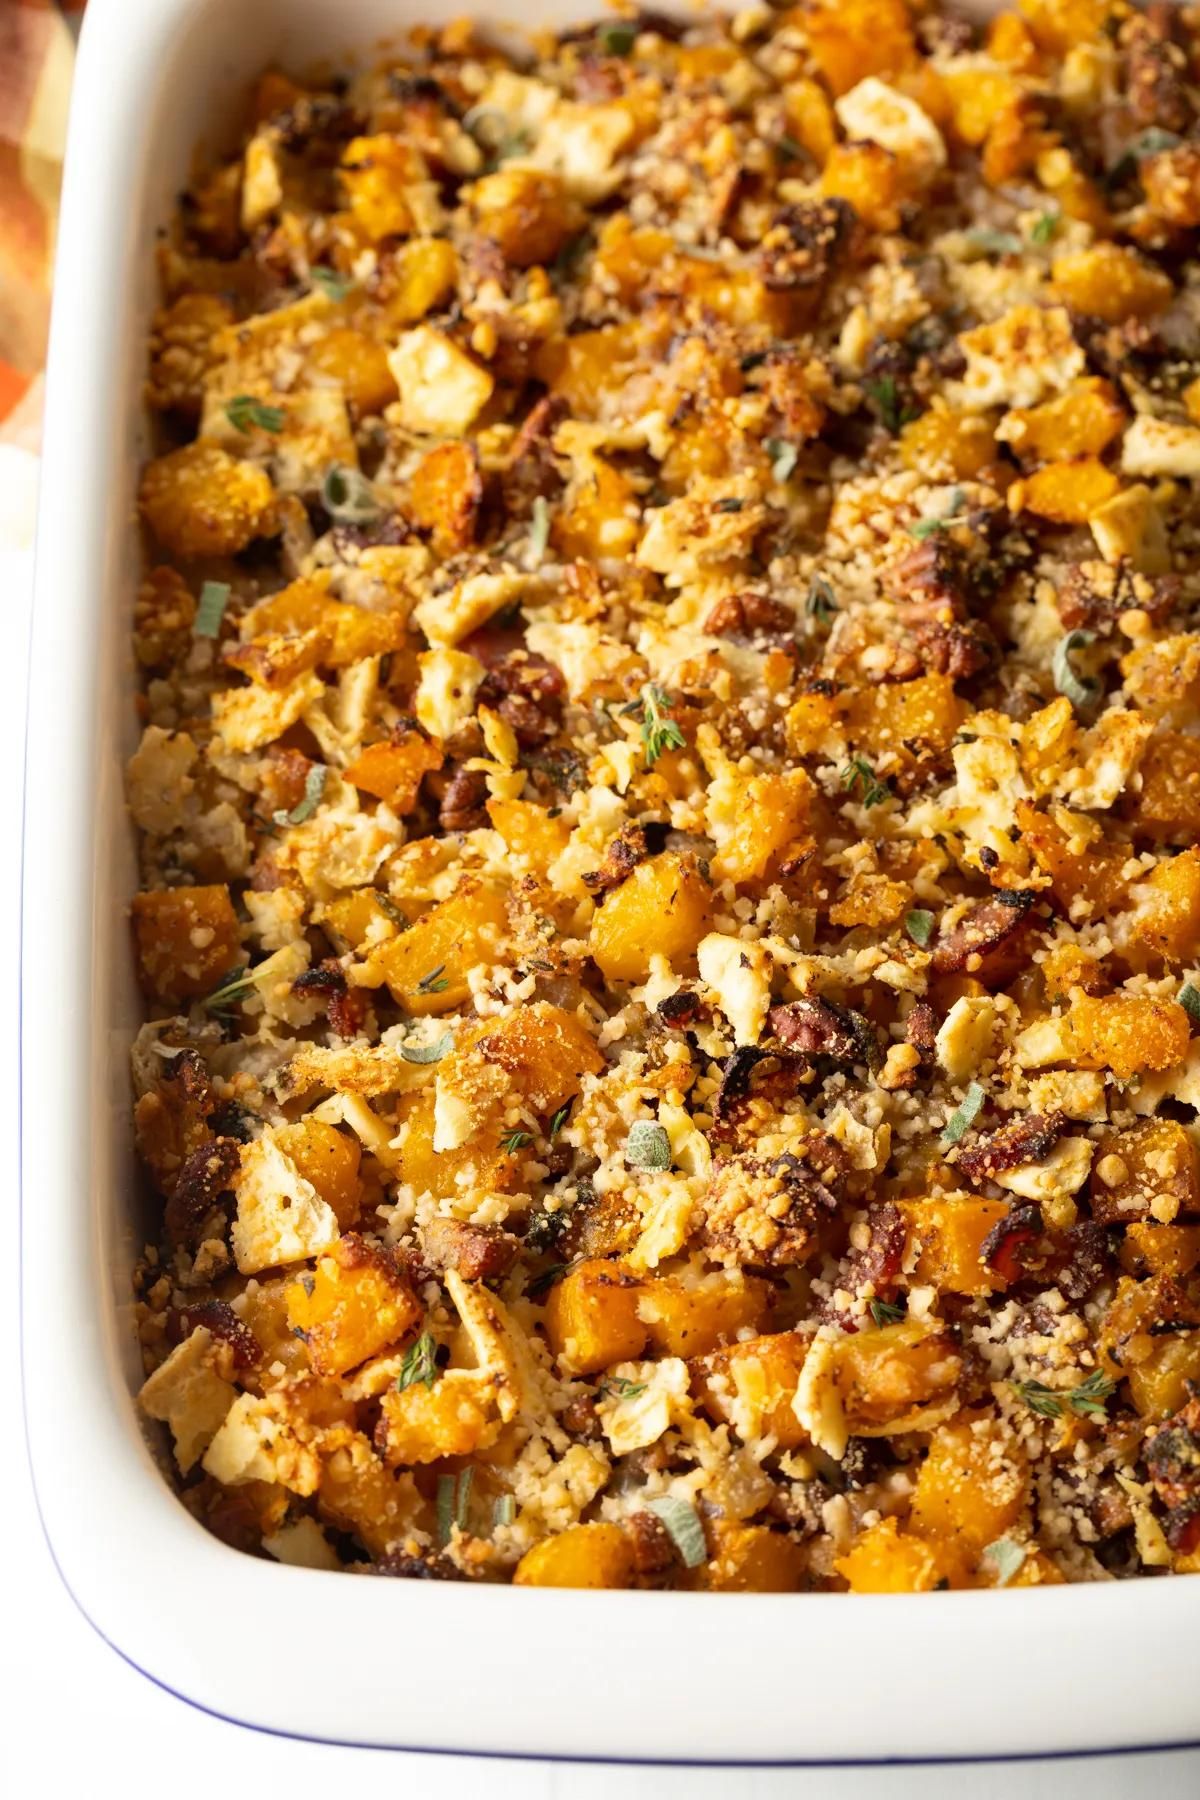 36 Recipes To Make The Most Of The Fall Harvest